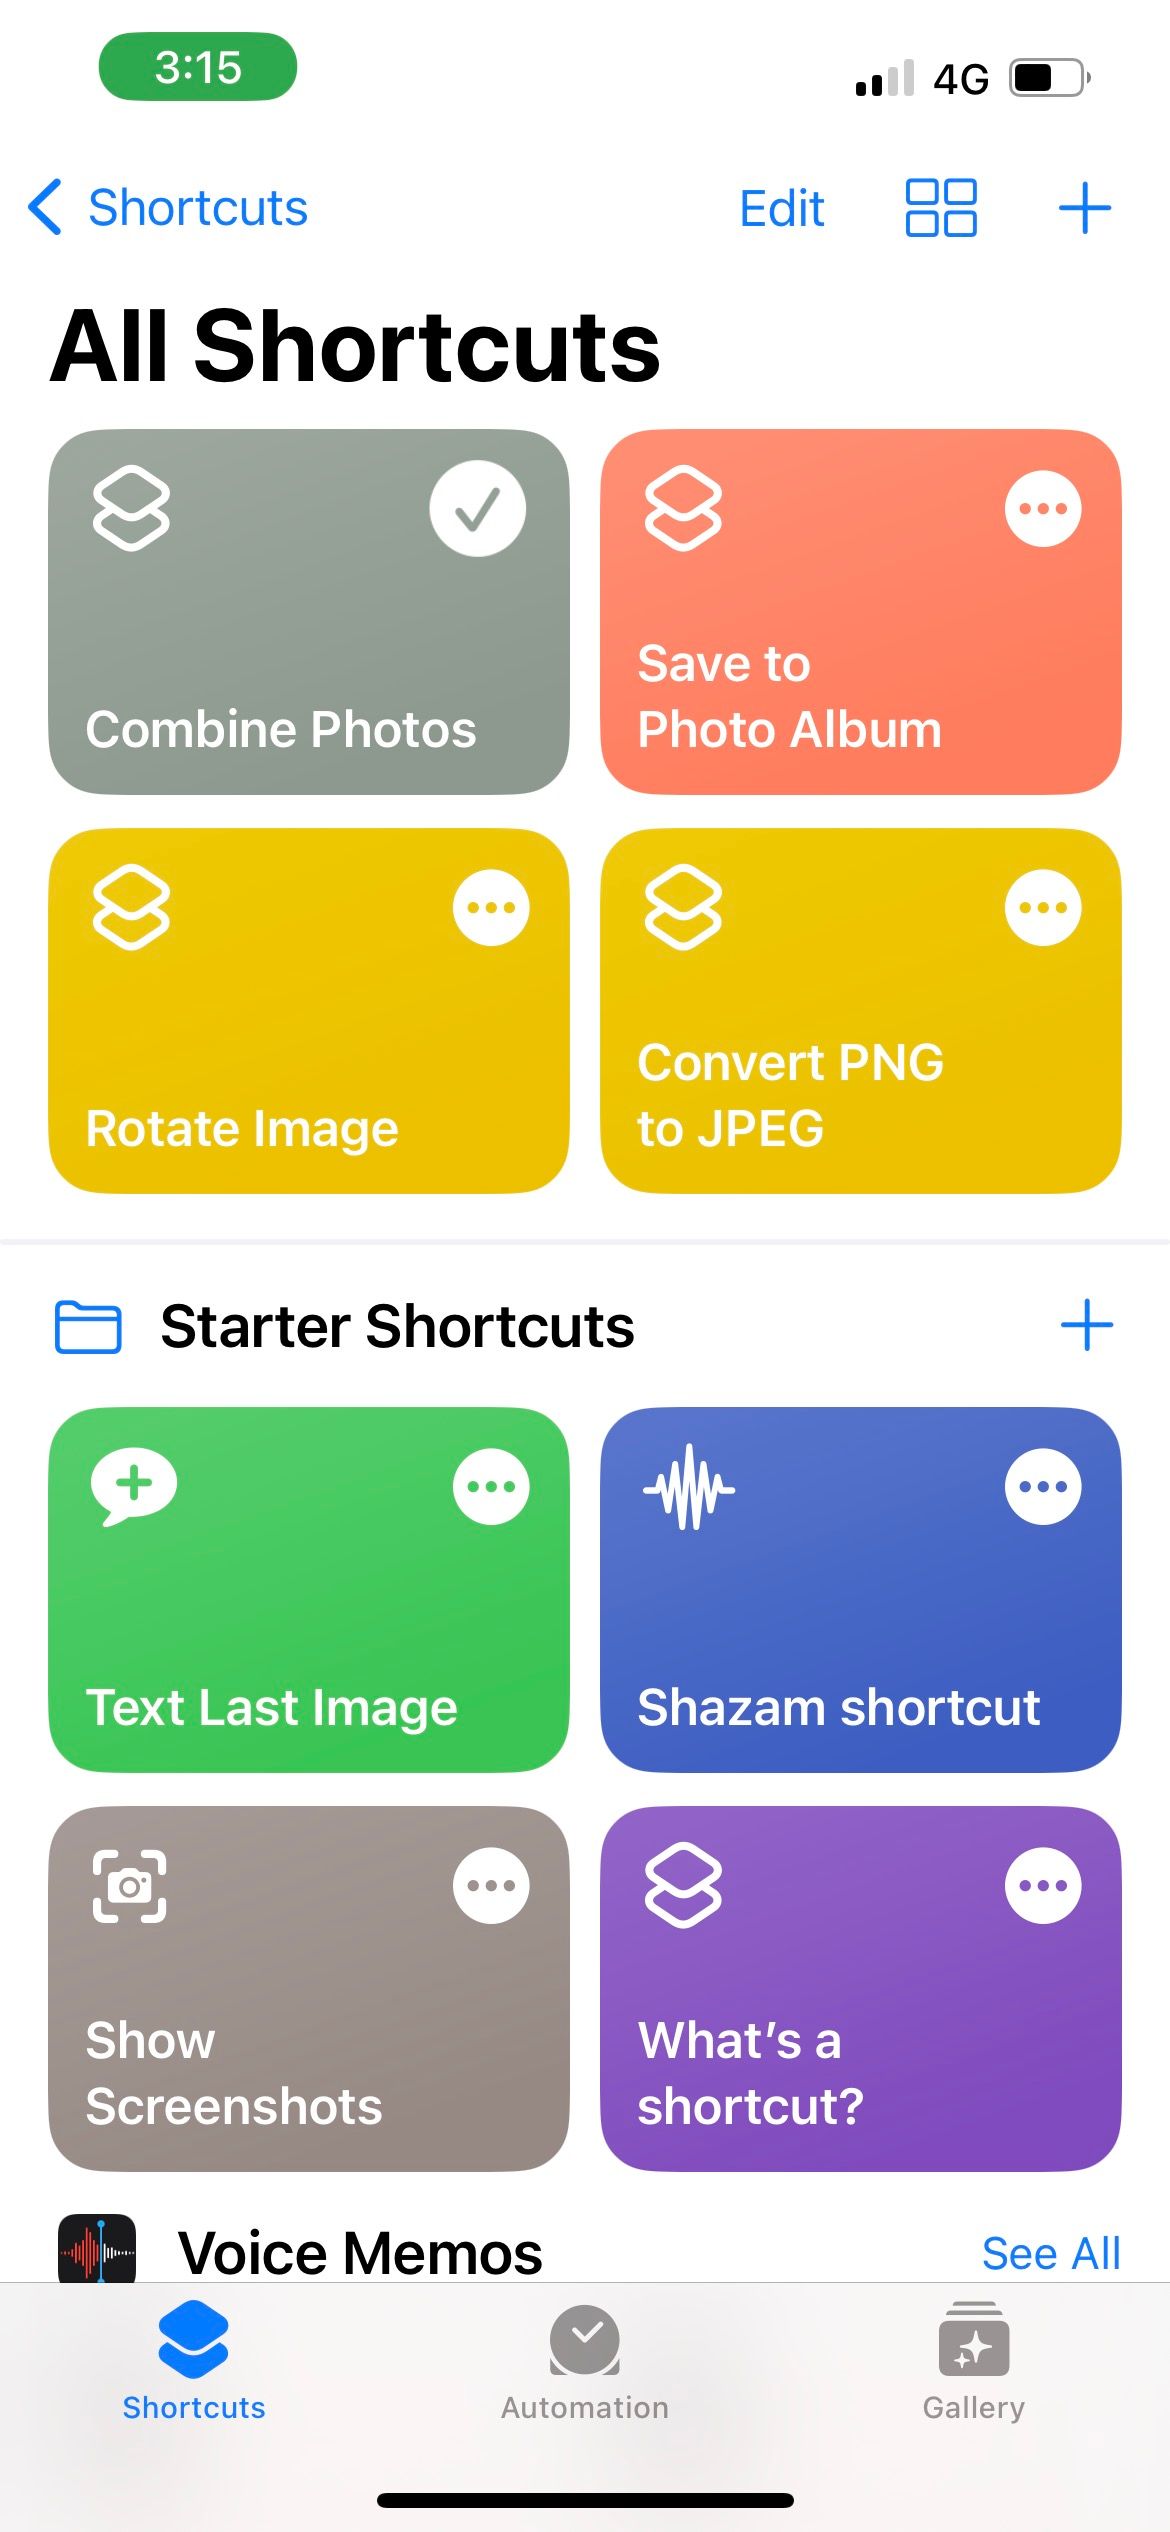 iphone shortcut successfully combined photos 